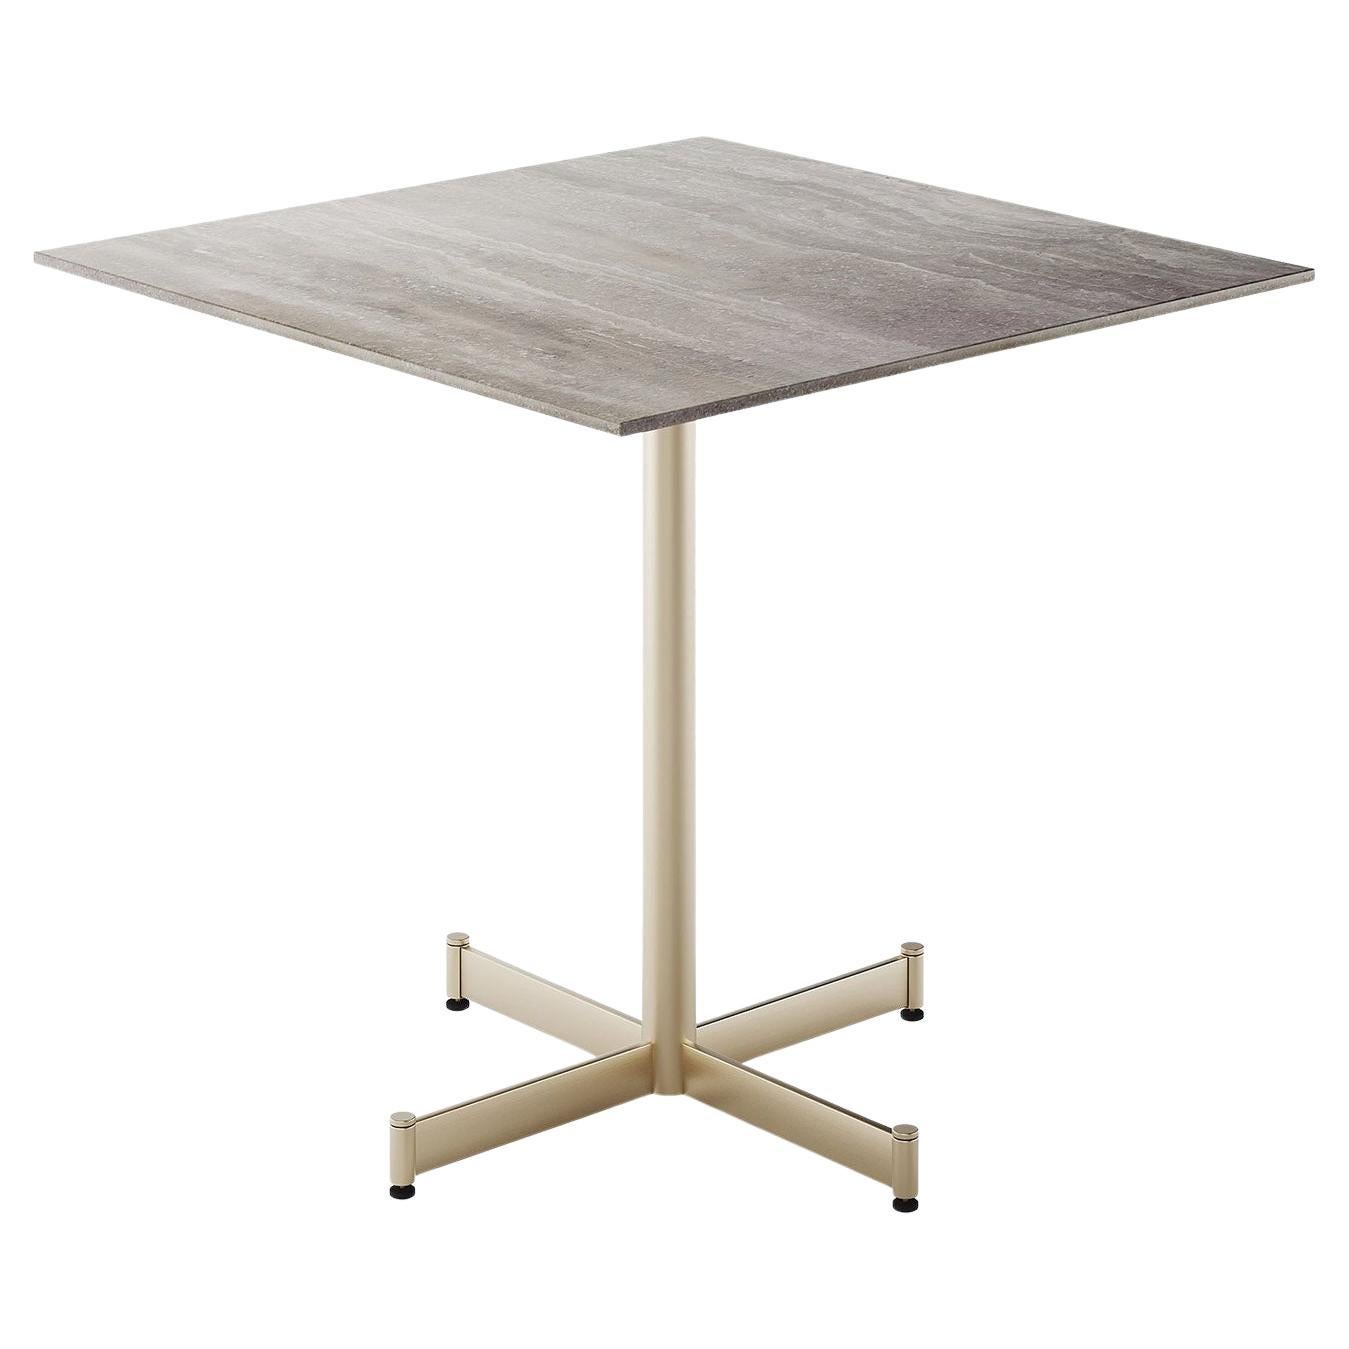 Fly Square Gray & Champagne Café Table by Braid Design Lab For Sale